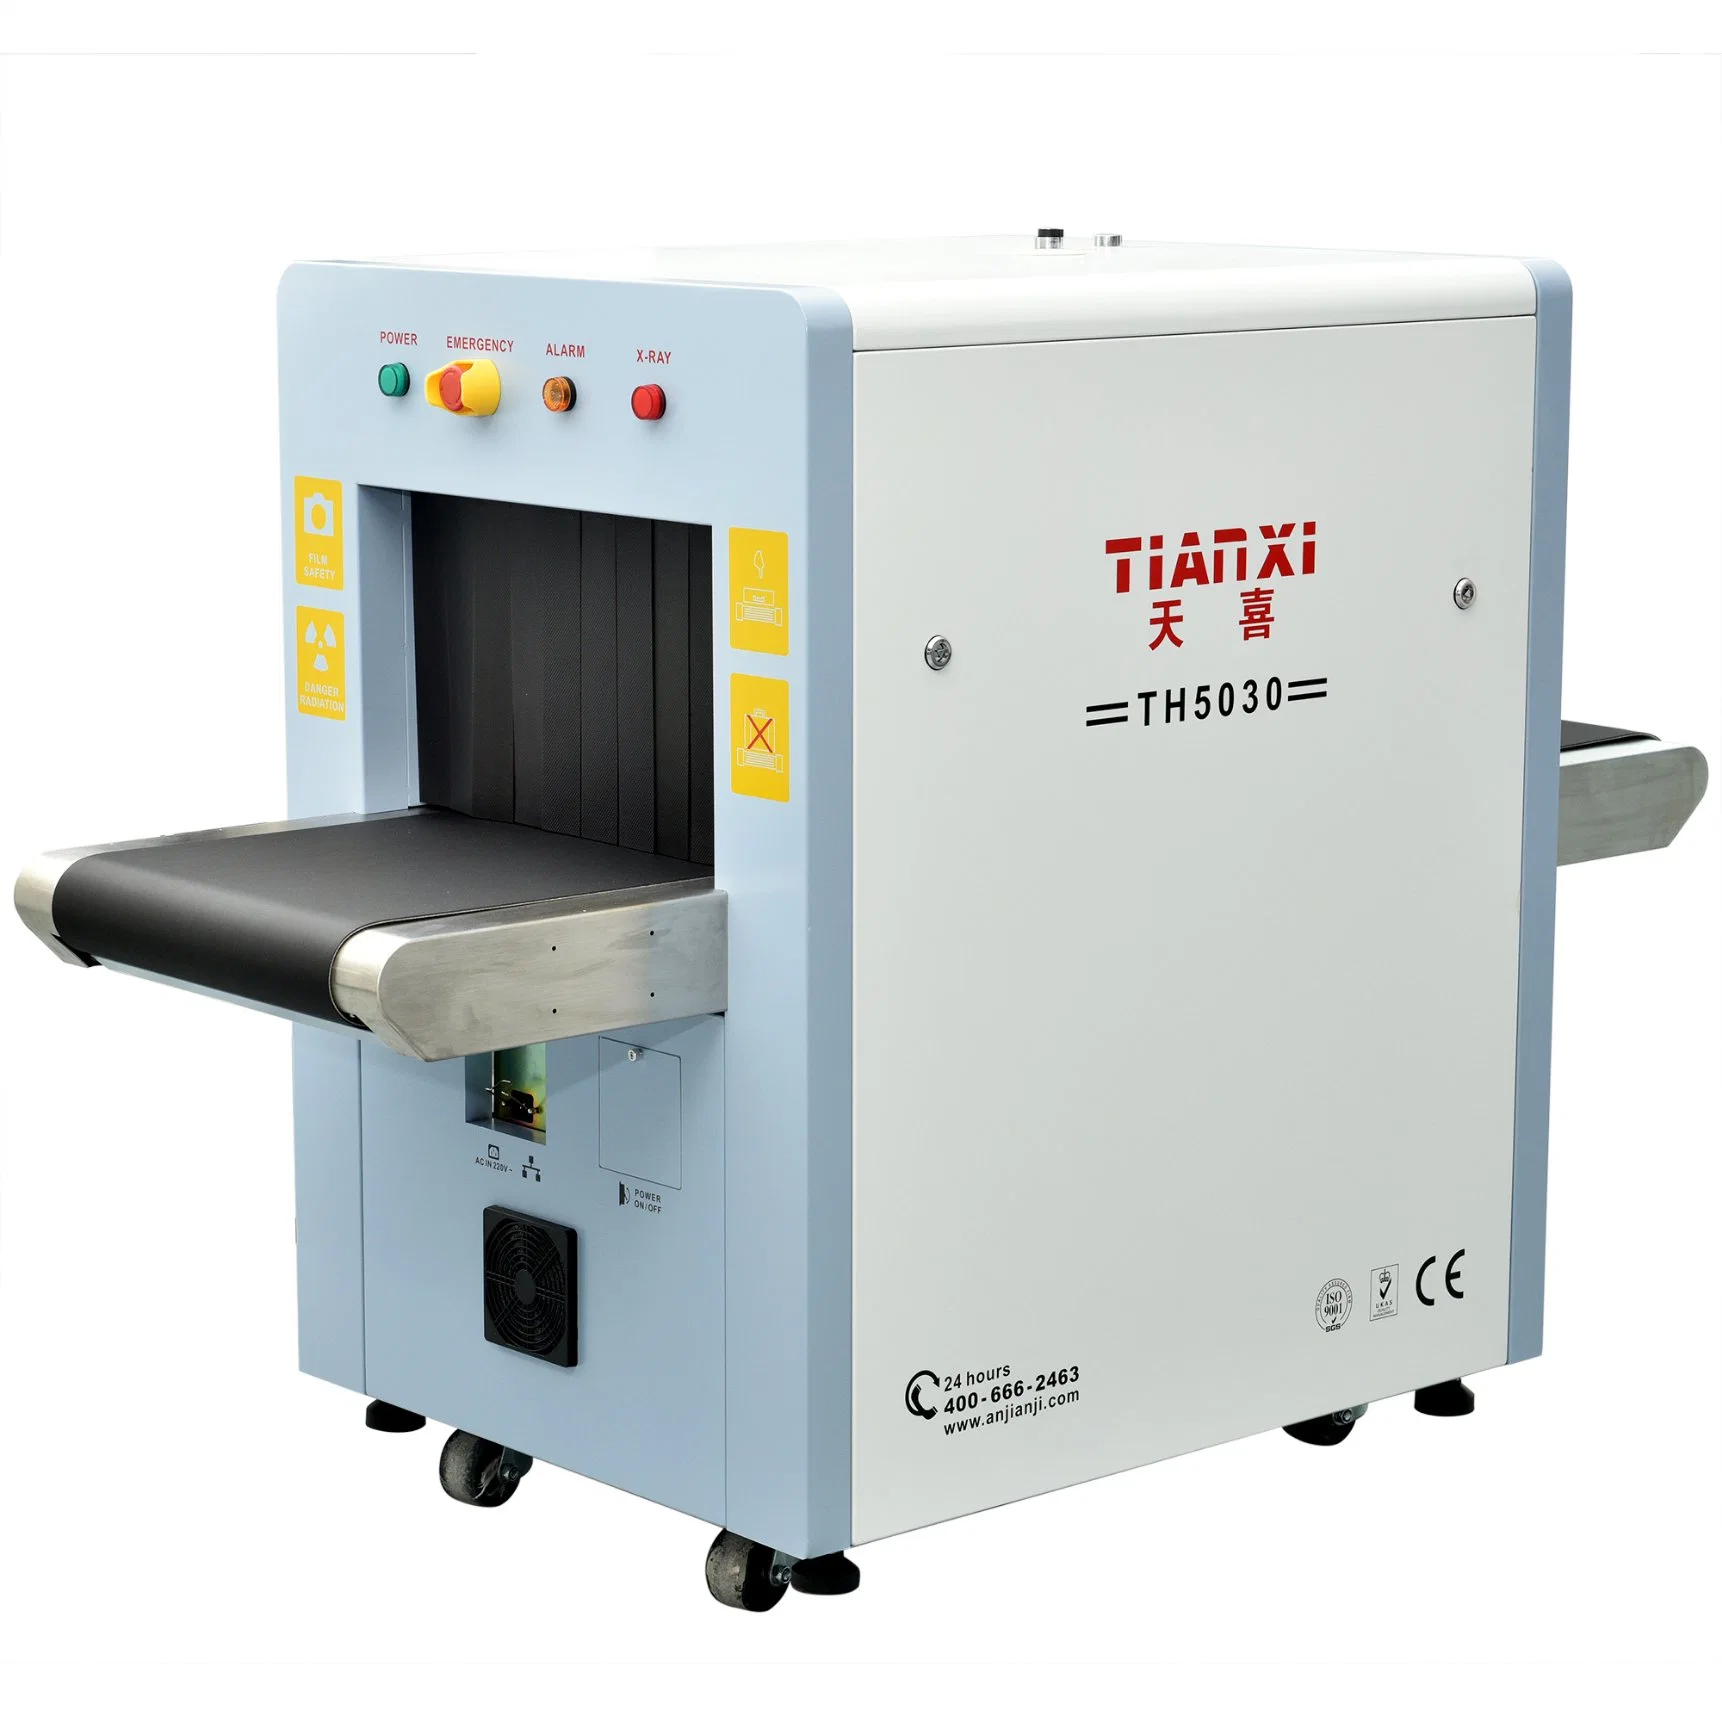 Dual Energy Th5030 OEM X-ray Airport Inspection Baggage Scanner and Luggage Scanner- FDA Approved & Biggest Factory